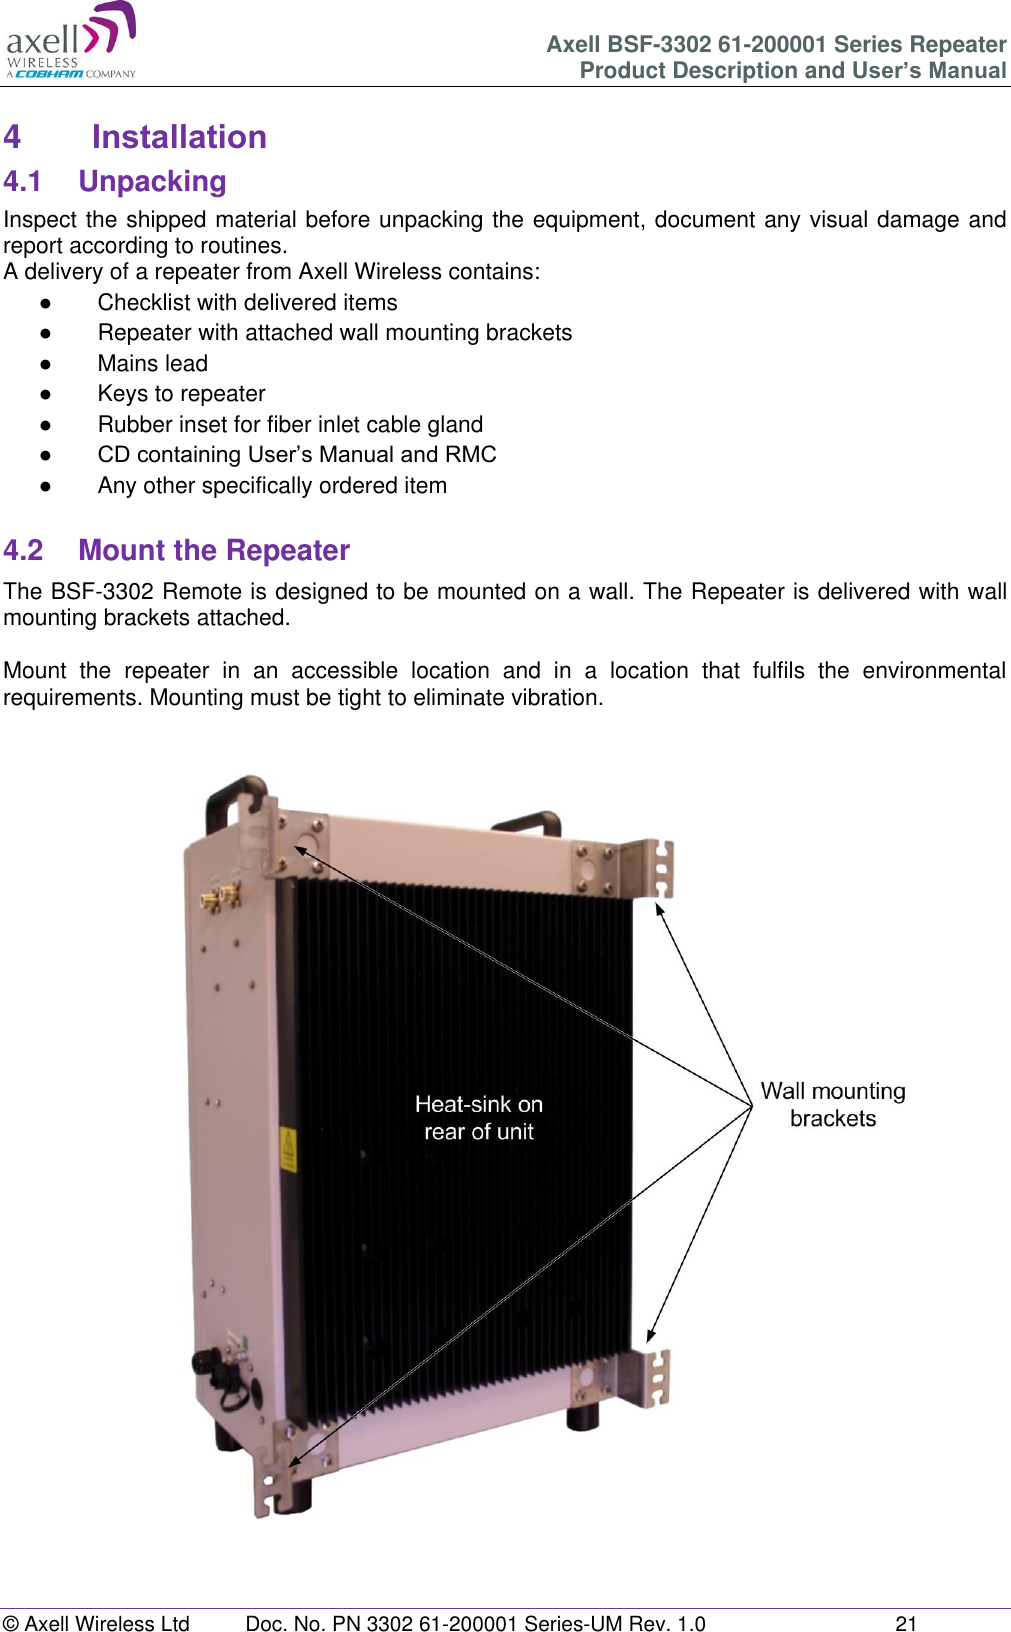 Axell BSF-3302 61-200001 Series Repeater Product Description and User’s Manual © Axell Wireless Ltd  Doc. No. PN 3302 61-200001 Series-UM Rev. 1.0  21   4  Installation 4.1  Unpacking Inspect the shipped material before unpacking the equipment, document any visual damage and report according to routines. A delivery of a repeater from Axell Wireless contains: ●  Checklist with delivered items ●  Repeater with attached wall mounting brackets ●  Mains lead ●  Keys to repeater  ●  Rubber inset for fiber inlet cable gland ● CD containing User’s Manual and RMC ●  Any other specifically ordered item  4.2  Mount the Repeater The BSF-3302 Remote is designed to be mounted on a wall. The Repeater is delivered with wall mounting brackets attached.   Mount  the  repeater  in  an  accessible  location  and  in  a  location  that  fulfils  the  environmental requirements. Mounting must be tight to eliminate vibration.     